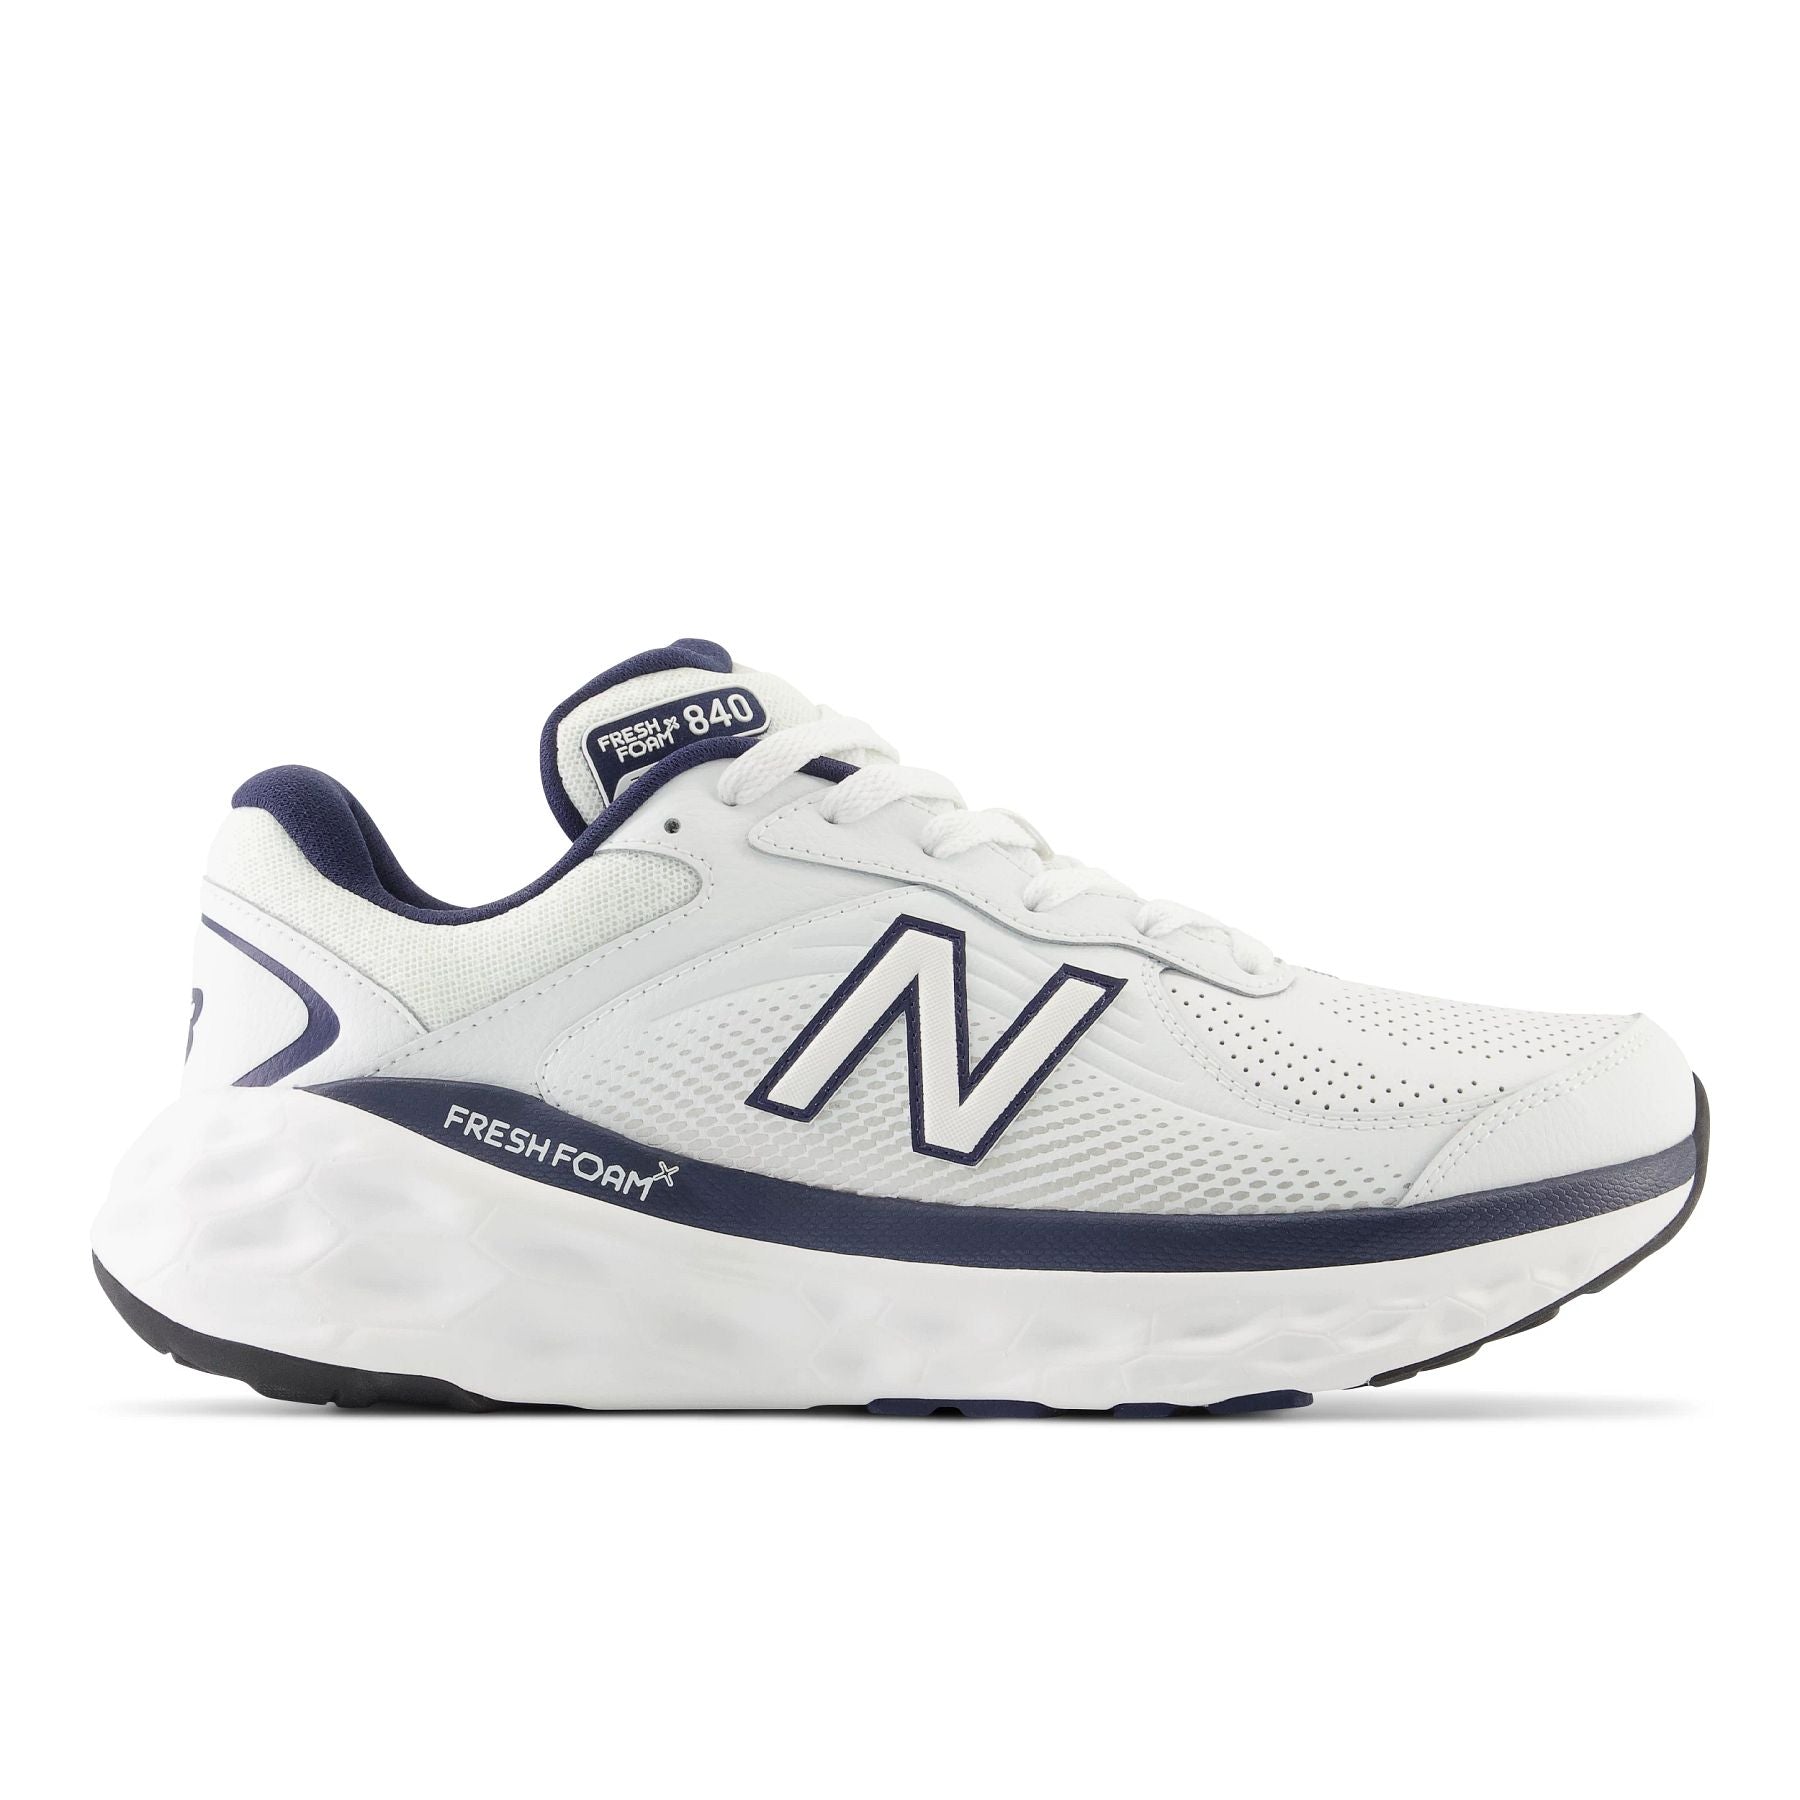 Lateral view of the Men's Leather New Balance MW840 V1 in White/Navy